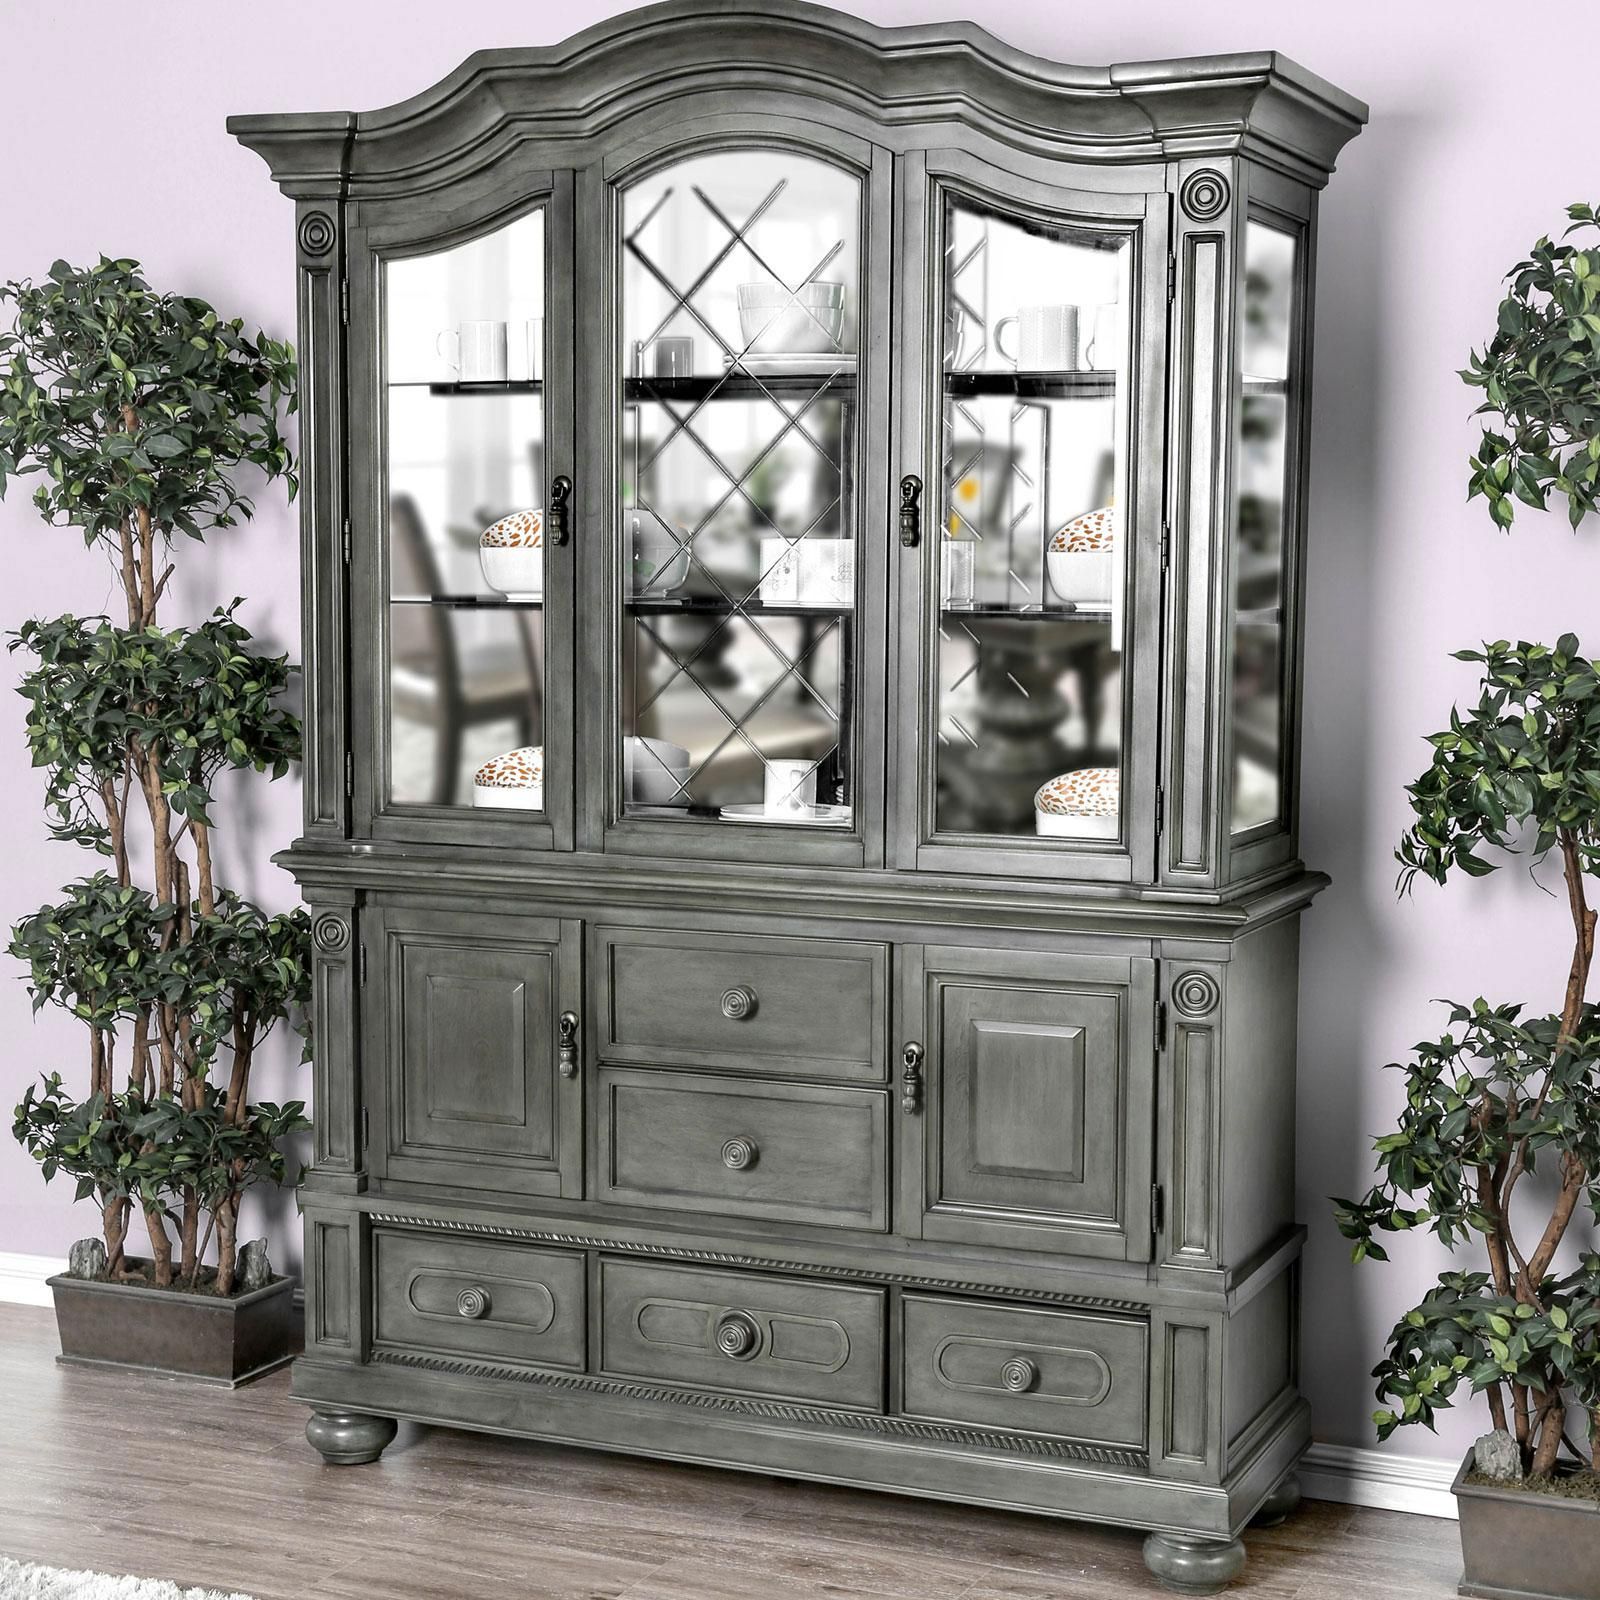 Traditional Wood Hutch Buffet In Gray Alpenafurniture With Regard To Orner Traditional Wood Sideboards (View 14 of 15)